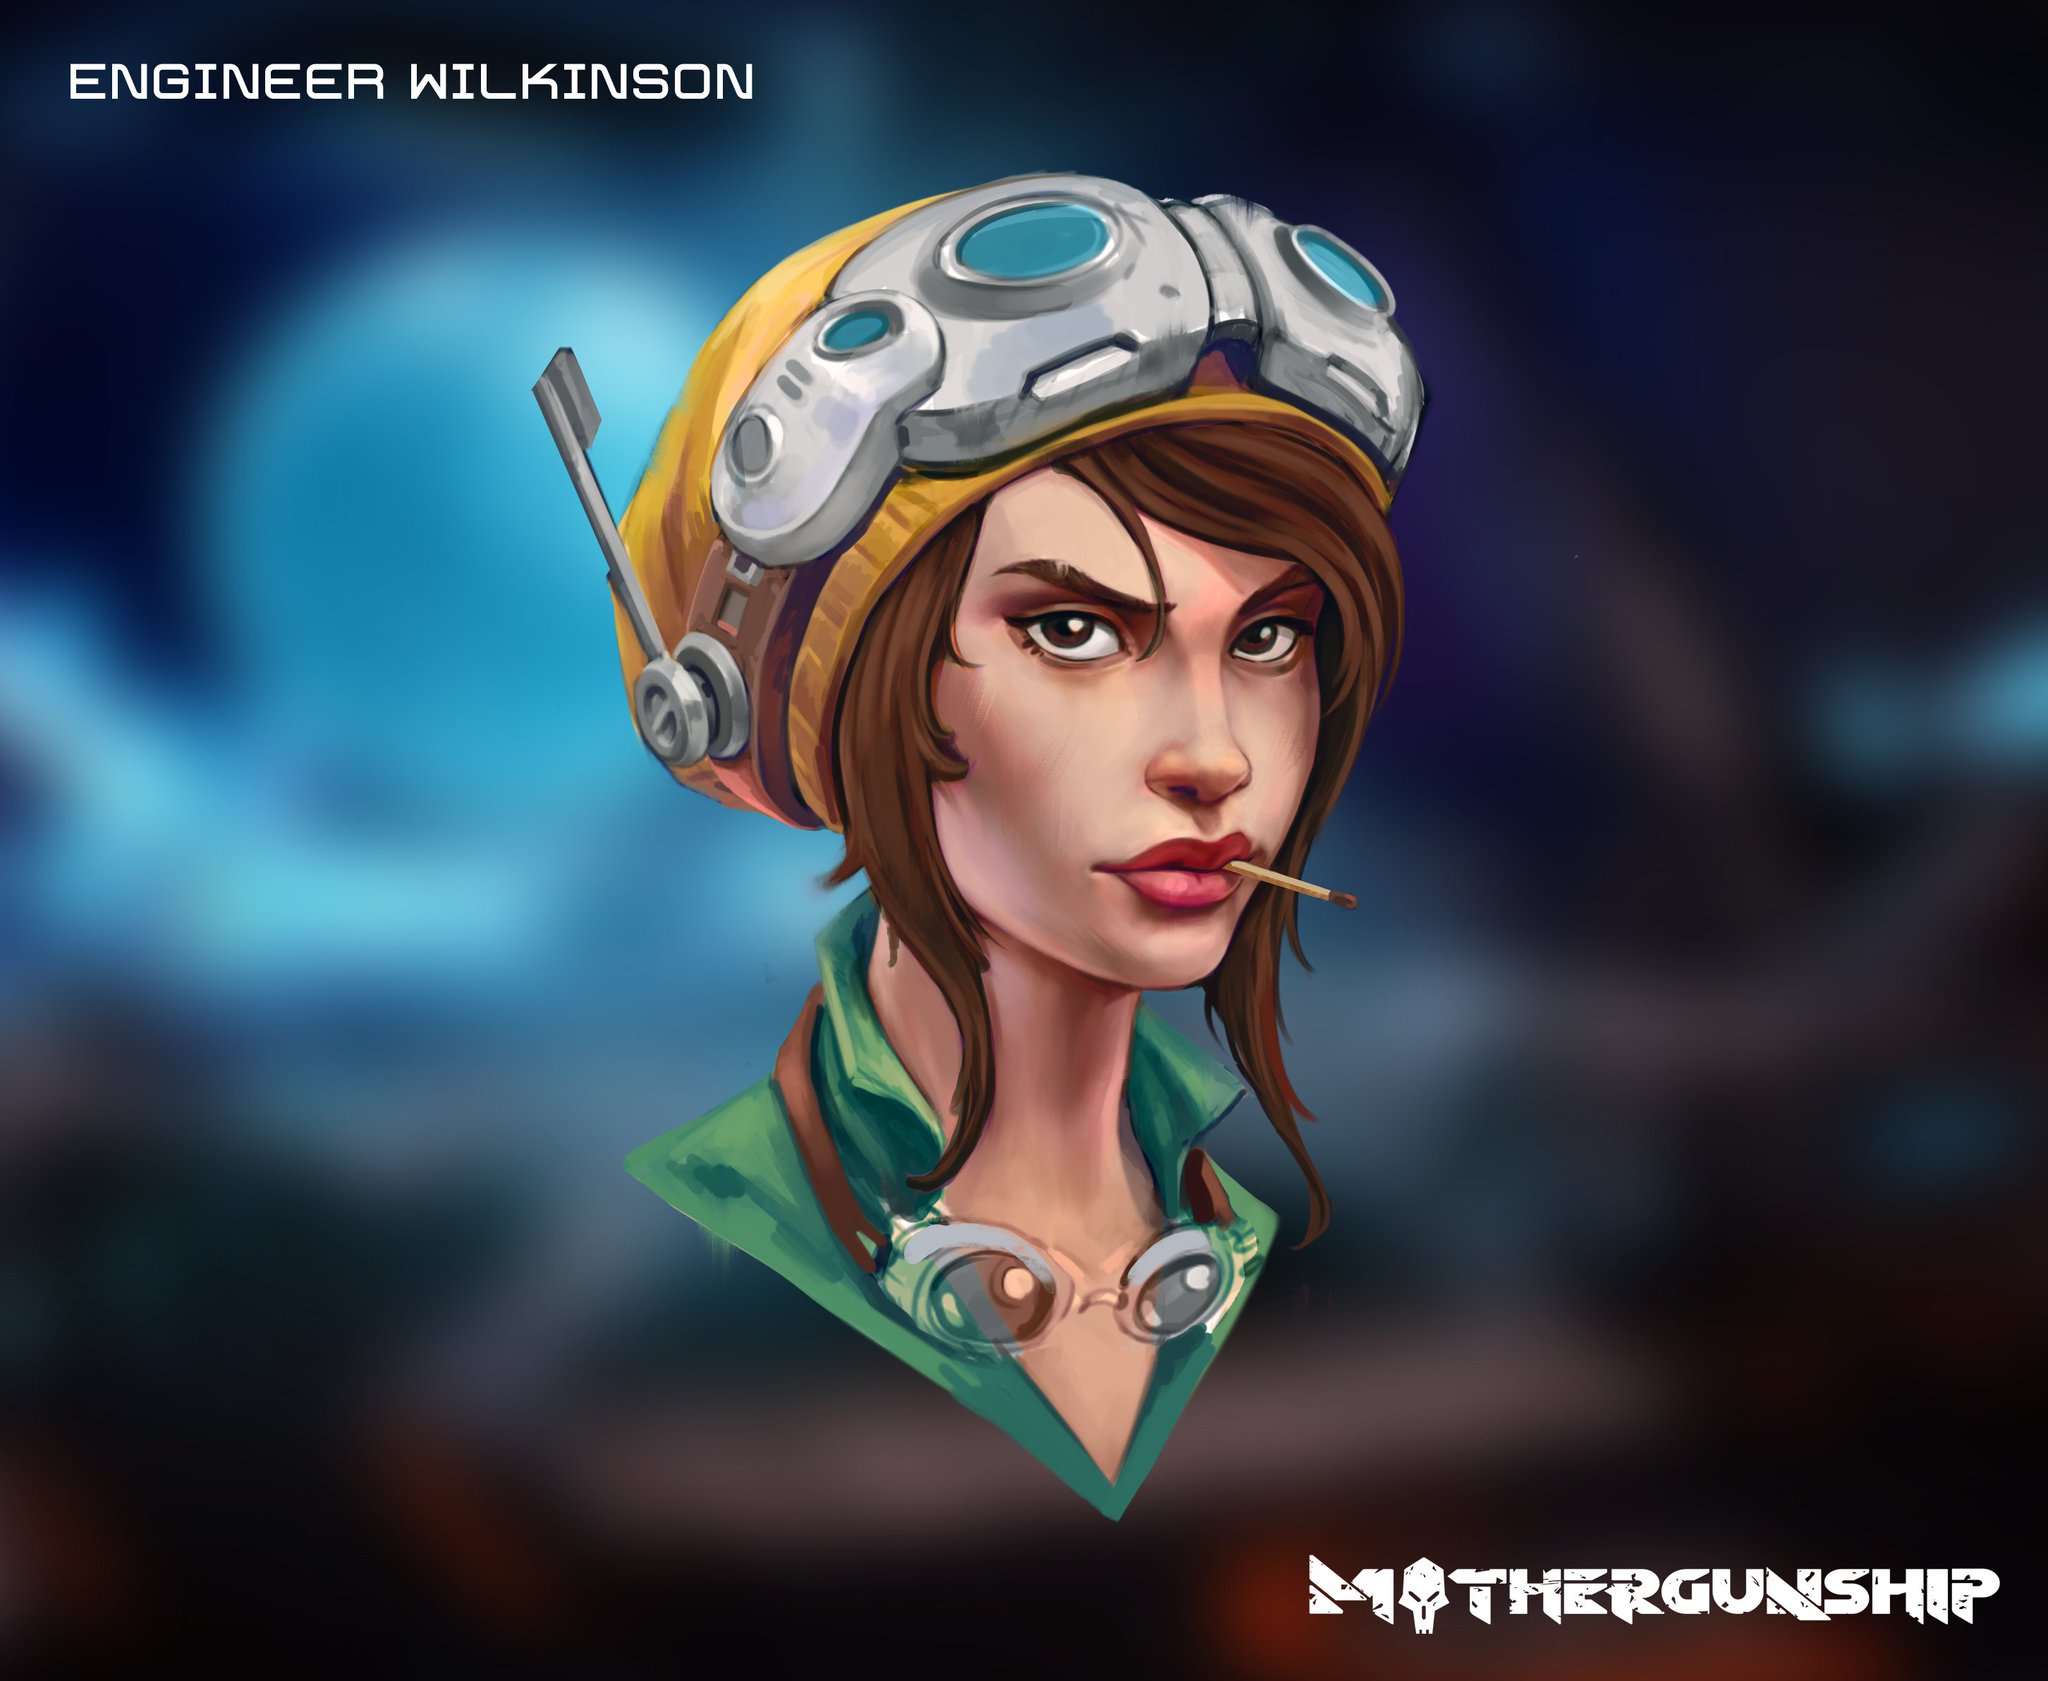 Mothergunship Meet Rachael Wilkinson Our Overworked Engineer Who Somehow Got Suckered Into Signing A Very Unfavorable Contract With Joe S Arms And Armory She Is A Bit Post Modern And Cynical But